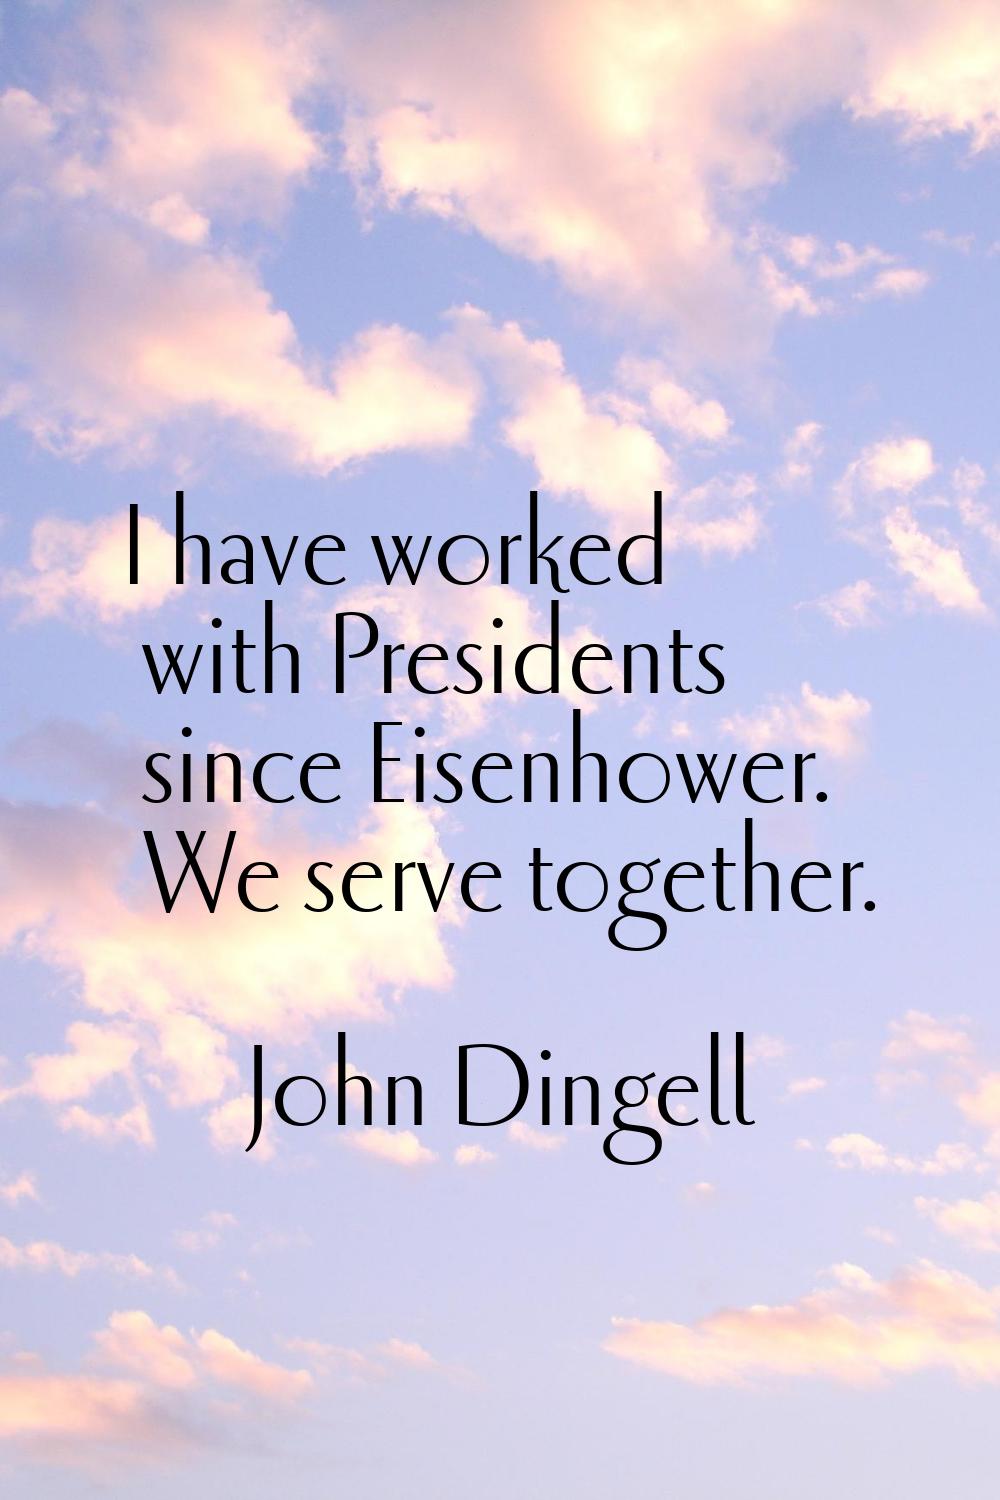 I have worked with Presidents since Eisenhower. We serve together.